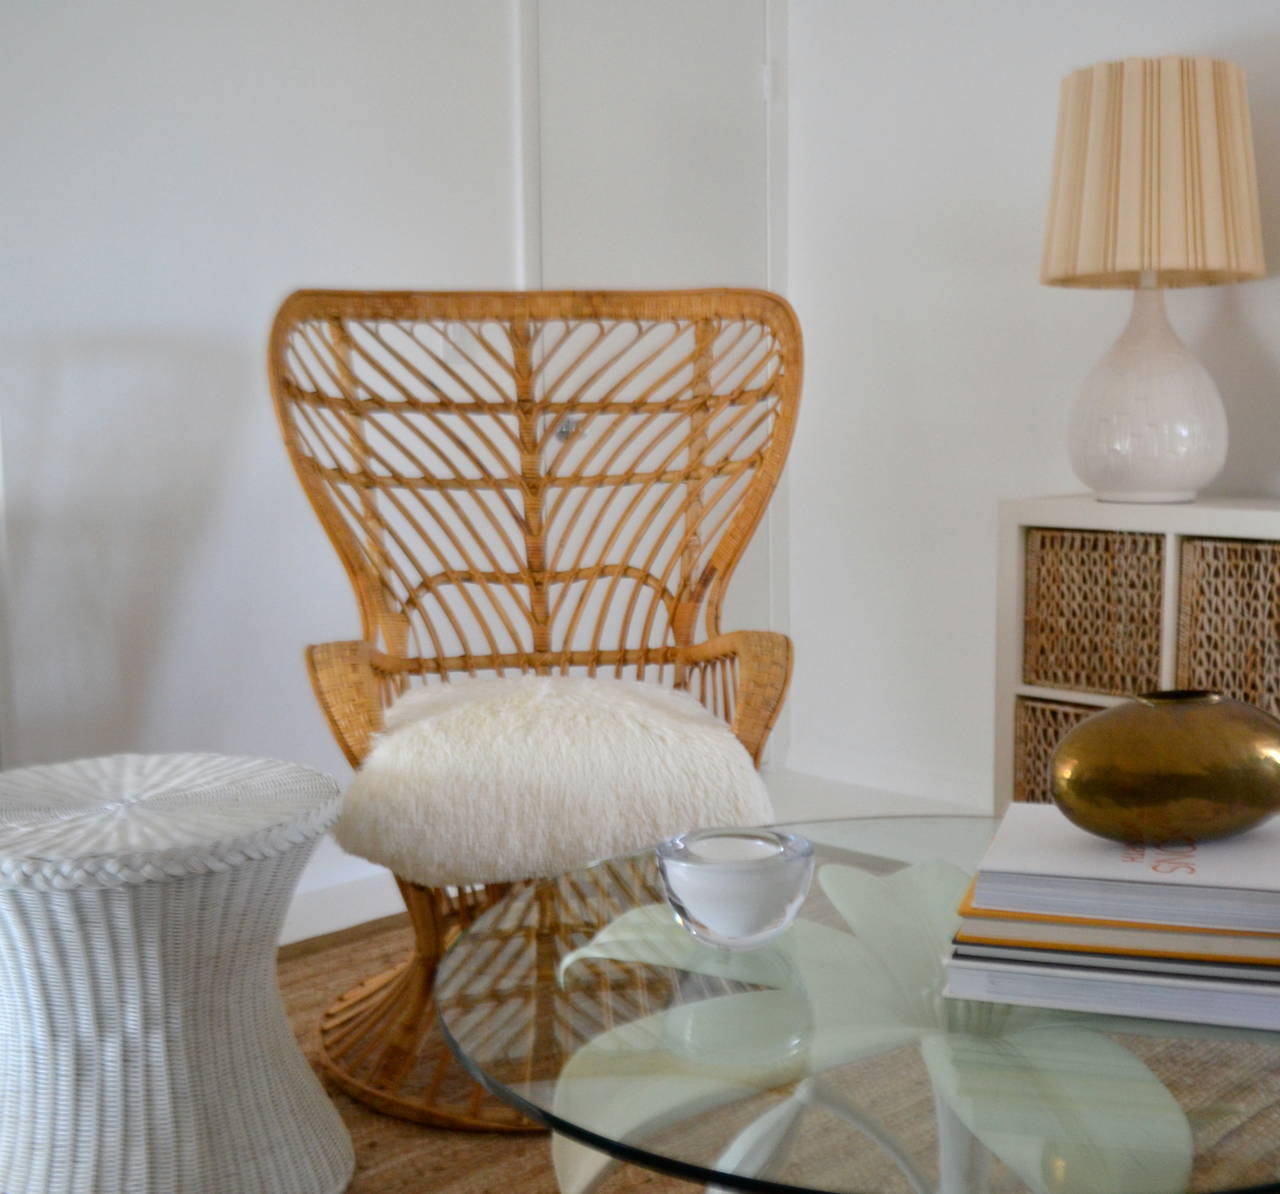 Striking Mid Century Modern woven rattan and bamboo peacock occasional chair,  c. 1950s -1960s. This stunning sculptural wicker side chair by Lio Carminati and Gio Ponti is designed and accented with a shag pile upholstered down cushion.